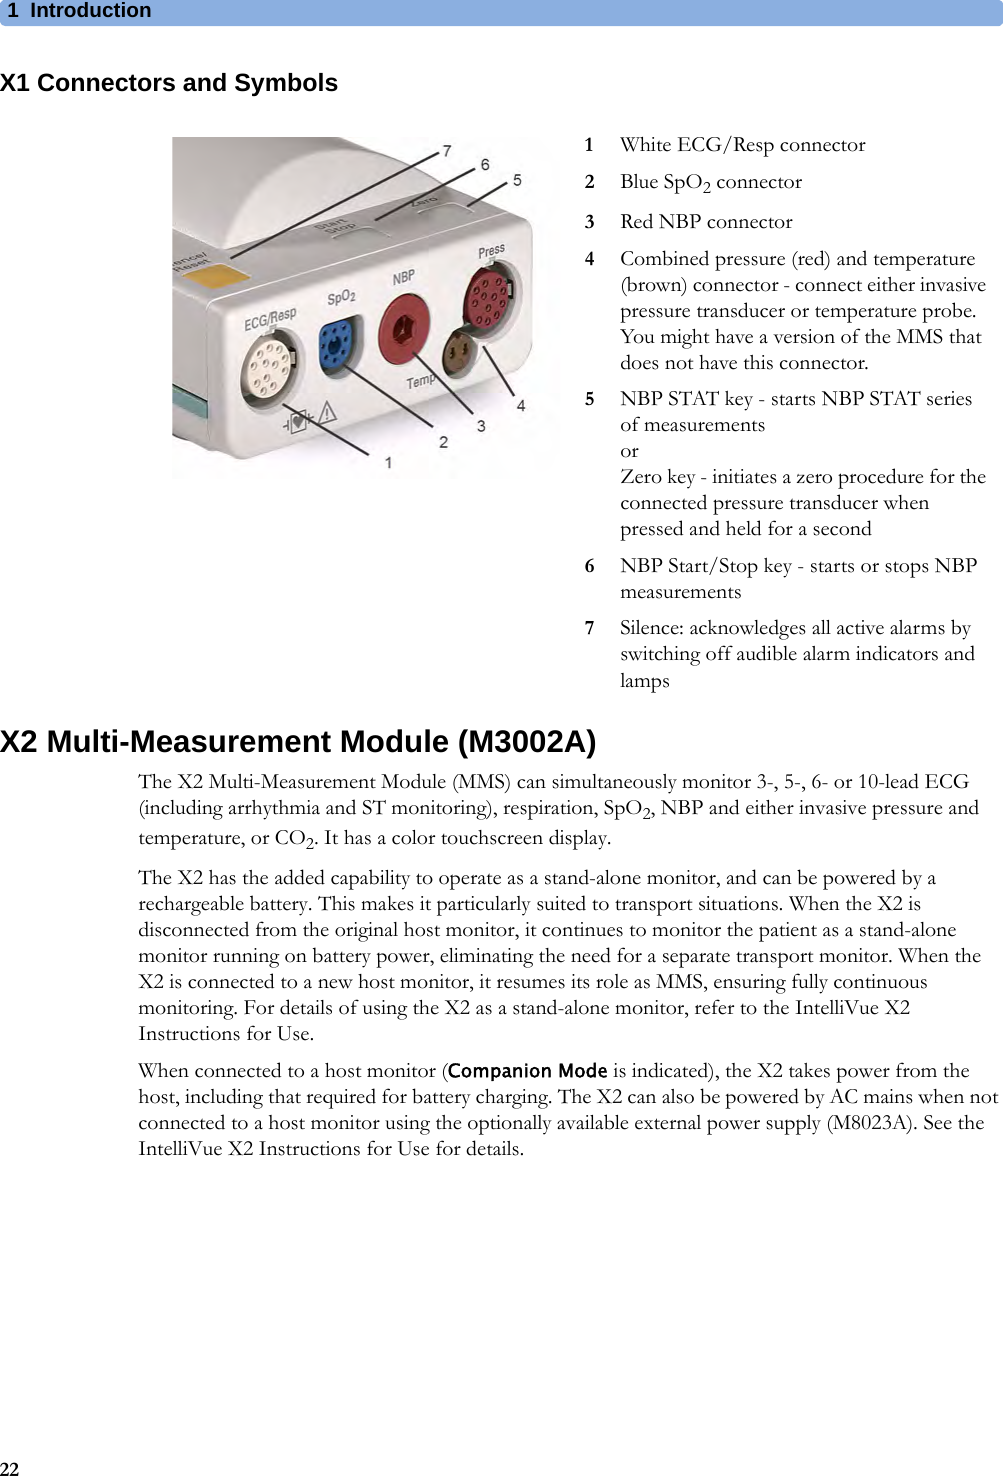 1Introduction22X1 Connectors and SymbolsX2 Multi-Measurement Module (M3002A)The X2 Multi-Measurement Module (MMS) can simultaneously monitor 3-, 5-, 6- or 10-lead ECG (including arrhythmia and ST monitoring), respiration, SpO2, NBP and either invasive pressure and temperature, or CO2. It has a color touchscreen display.The X2 has the added capability to operate as a stand-alone monitor, and can be powered by a rechargeable battery. This makes it particularly suited to transport situations. When the X2 is disconnected from the original host monitor, it continues to monitor the patient as a stand-alone monitor running on battery power, eliminating the need for a separate transport monitor. When the X2 is connected to a new host monitor, it resumes its role as MMS, ensuring fully continuous monitoring. For details of using the X2 as a stand-alone monitor, refer to the IntelliVue X2 Instructions for Use.When connected to a host monitor (Companion Mode is indicated), the X2 takes power from the host, including that required for battery charging. The X2 can also be powered by AC mains when not connected to a host monitor using the optionally available external power supply (M8023A). See the IntelliVue X2 Instructions for Use for details.1White ECG/Resp connector2Blue SpO2 connector3Red NBP connector4Combined pressure (red) and temperature (brown) connector - connect either invasive pressure transducer or temperature probe. You might have a version of the MMS that does not have this connector.5NBP STAT key - starts NBP STAT series of measurementsorZero key - initiates a zero procedure for the connected pressure transducer when pressed and held for a second6NBP Start/Stop key - starts or stops NBP measurements7Silence: acknowledges all active alarms by switching off audible alarm indicators and lamps